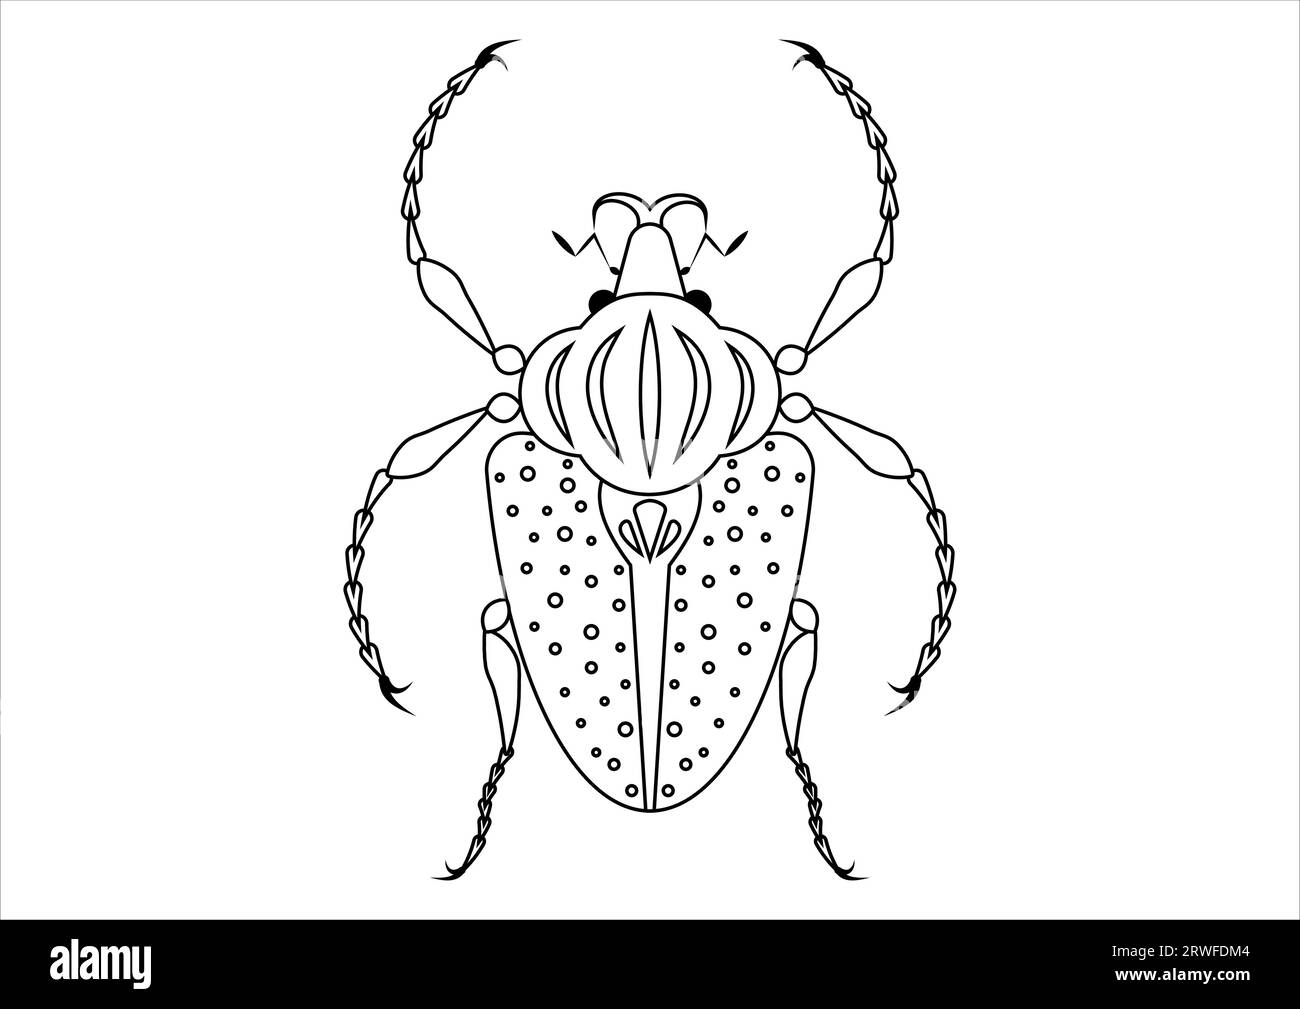 Black and White Goliathus Regius Beetle Clipart isolated on White Background. Coloring Page of a Goliathus Regius Beetle Stock Vector